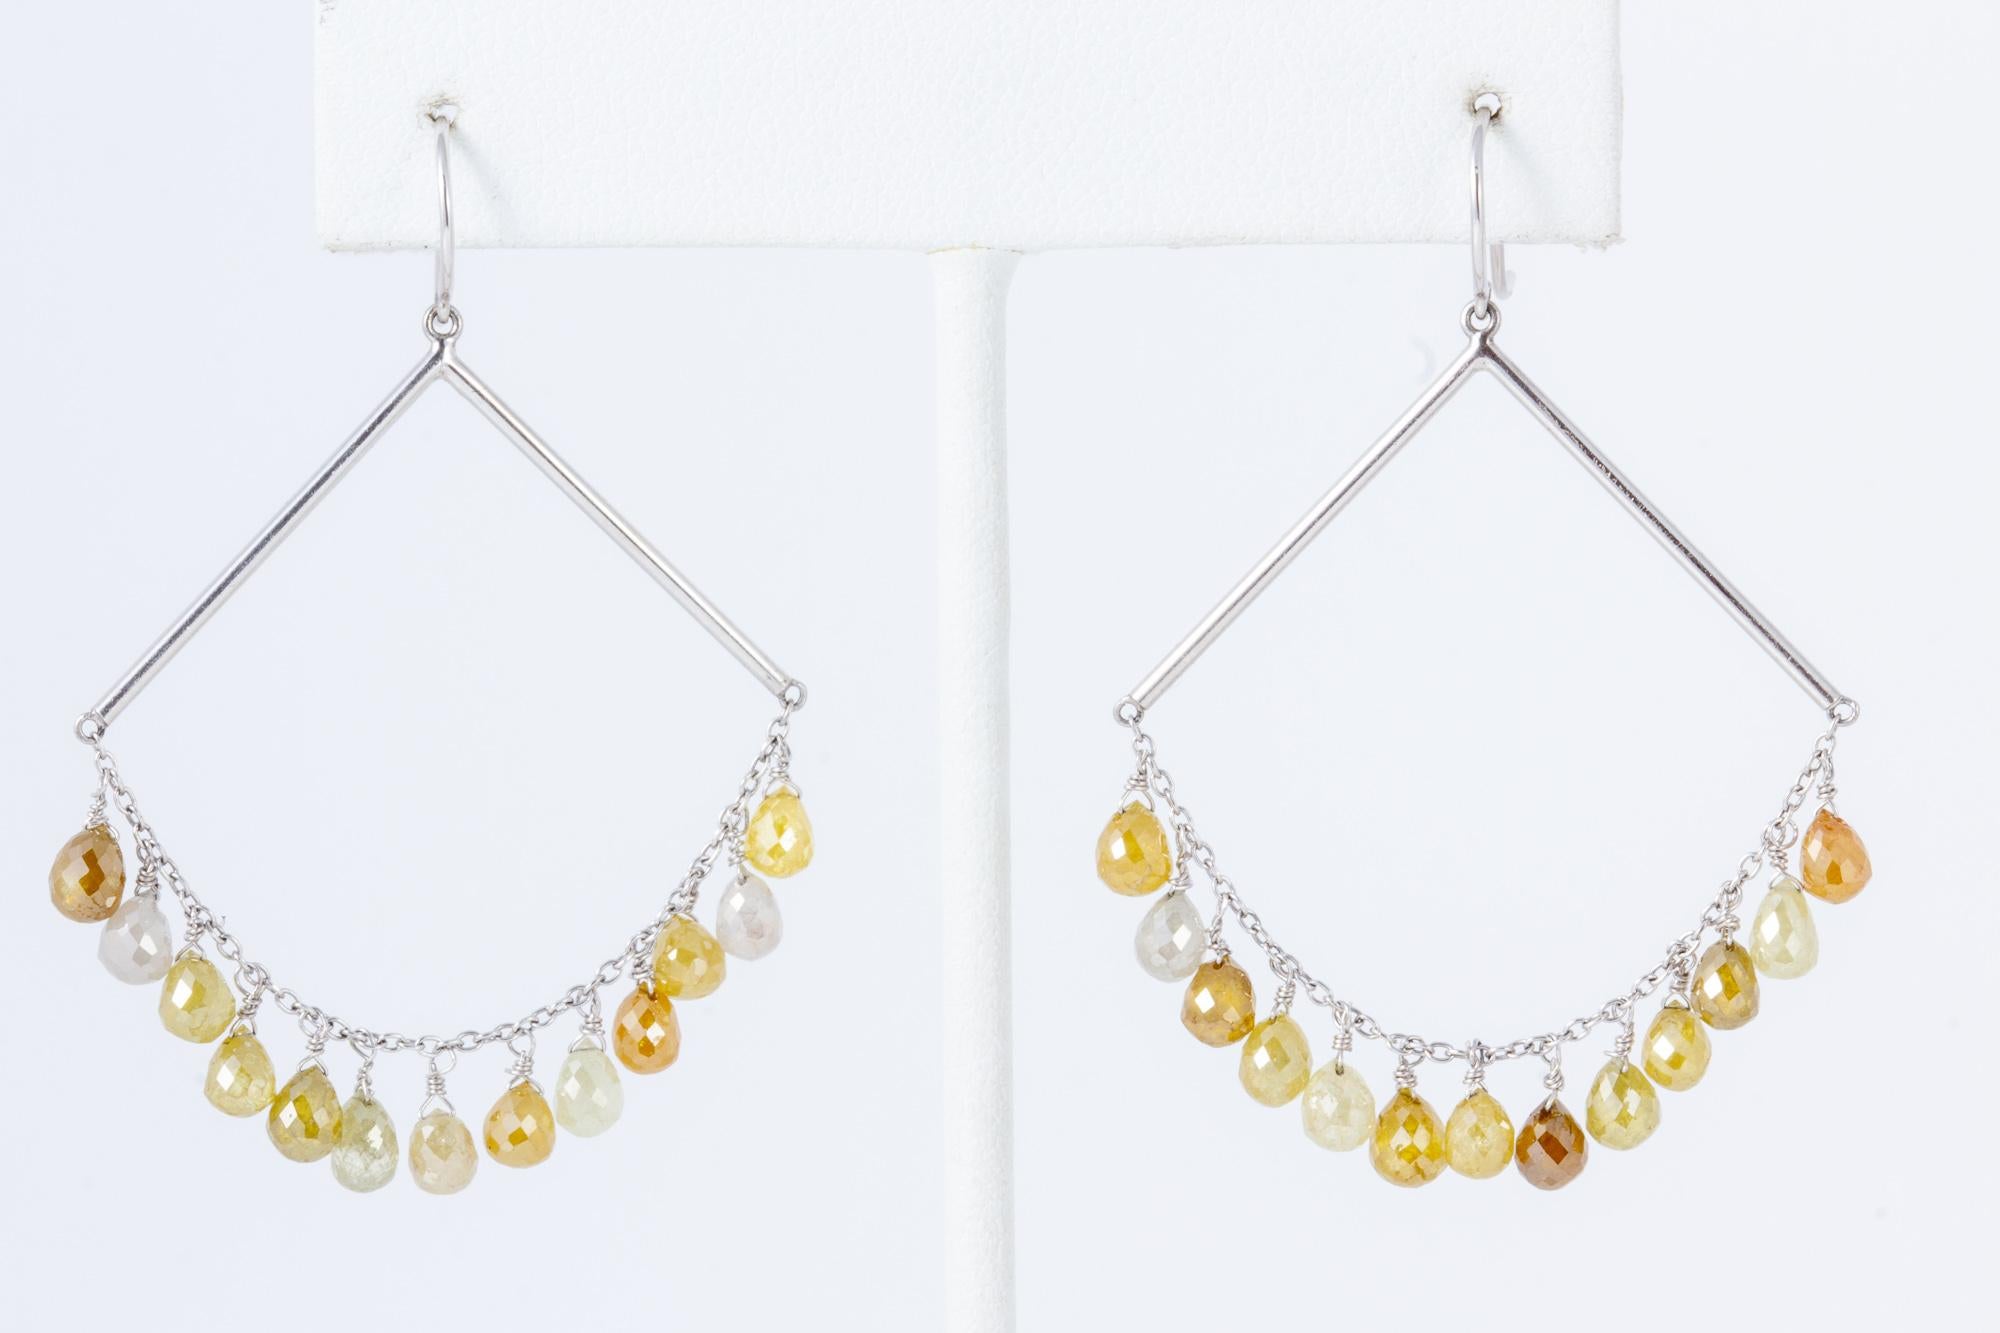 Contemporary earrings featuring a beautiful pallet of untreated natural colored diamonds.  These well faceted briolette stones, popular since the Victorian era have been paired with clean lines with a modern and edgy feel.  Dazzling in every